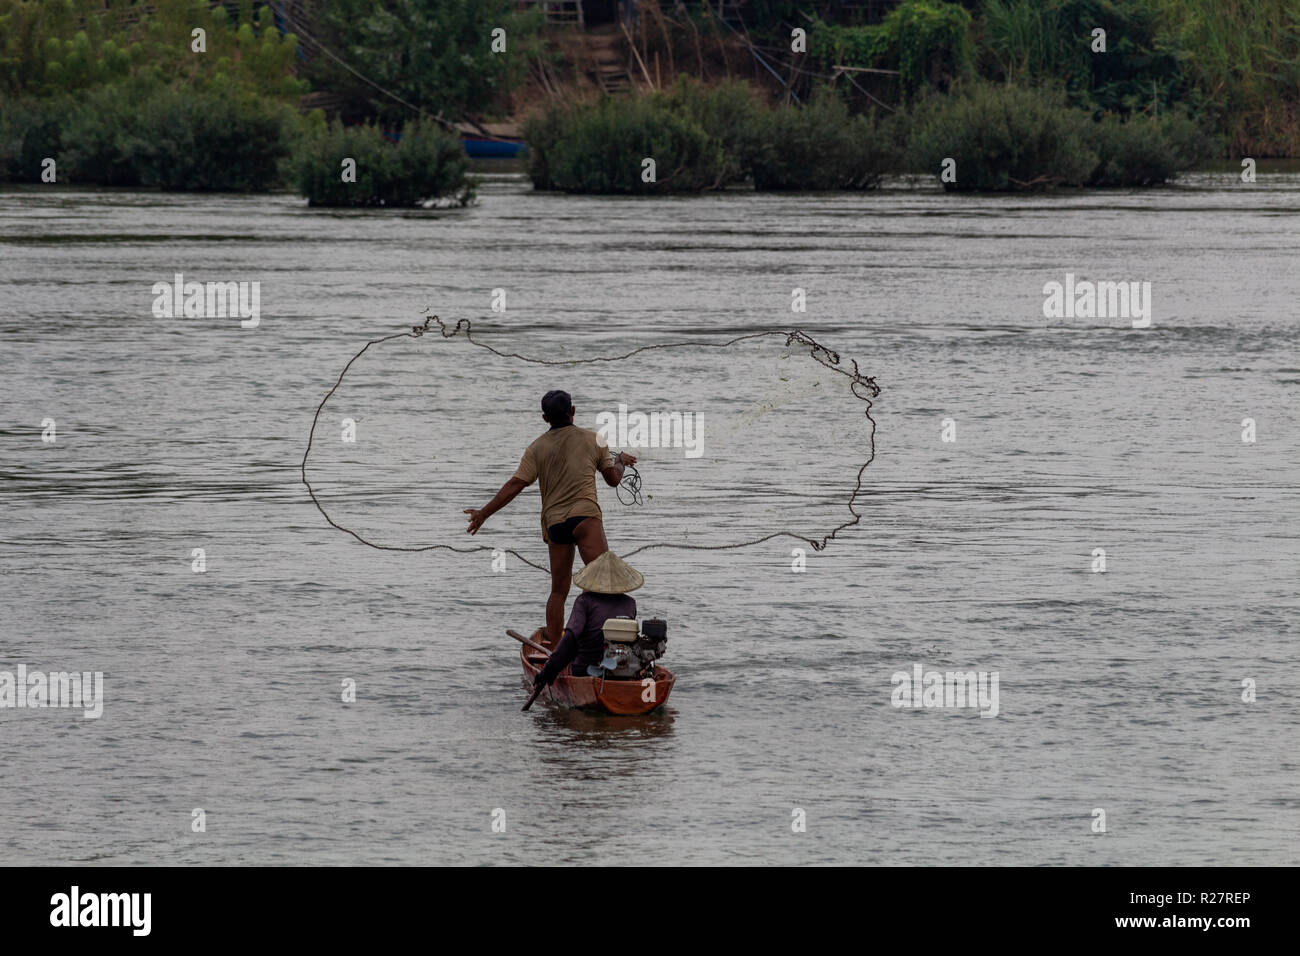 Don Det, Laos - April 24, 2018: Local fisherman throwing a fishing net in the Mekong river at dusk Stock Photo